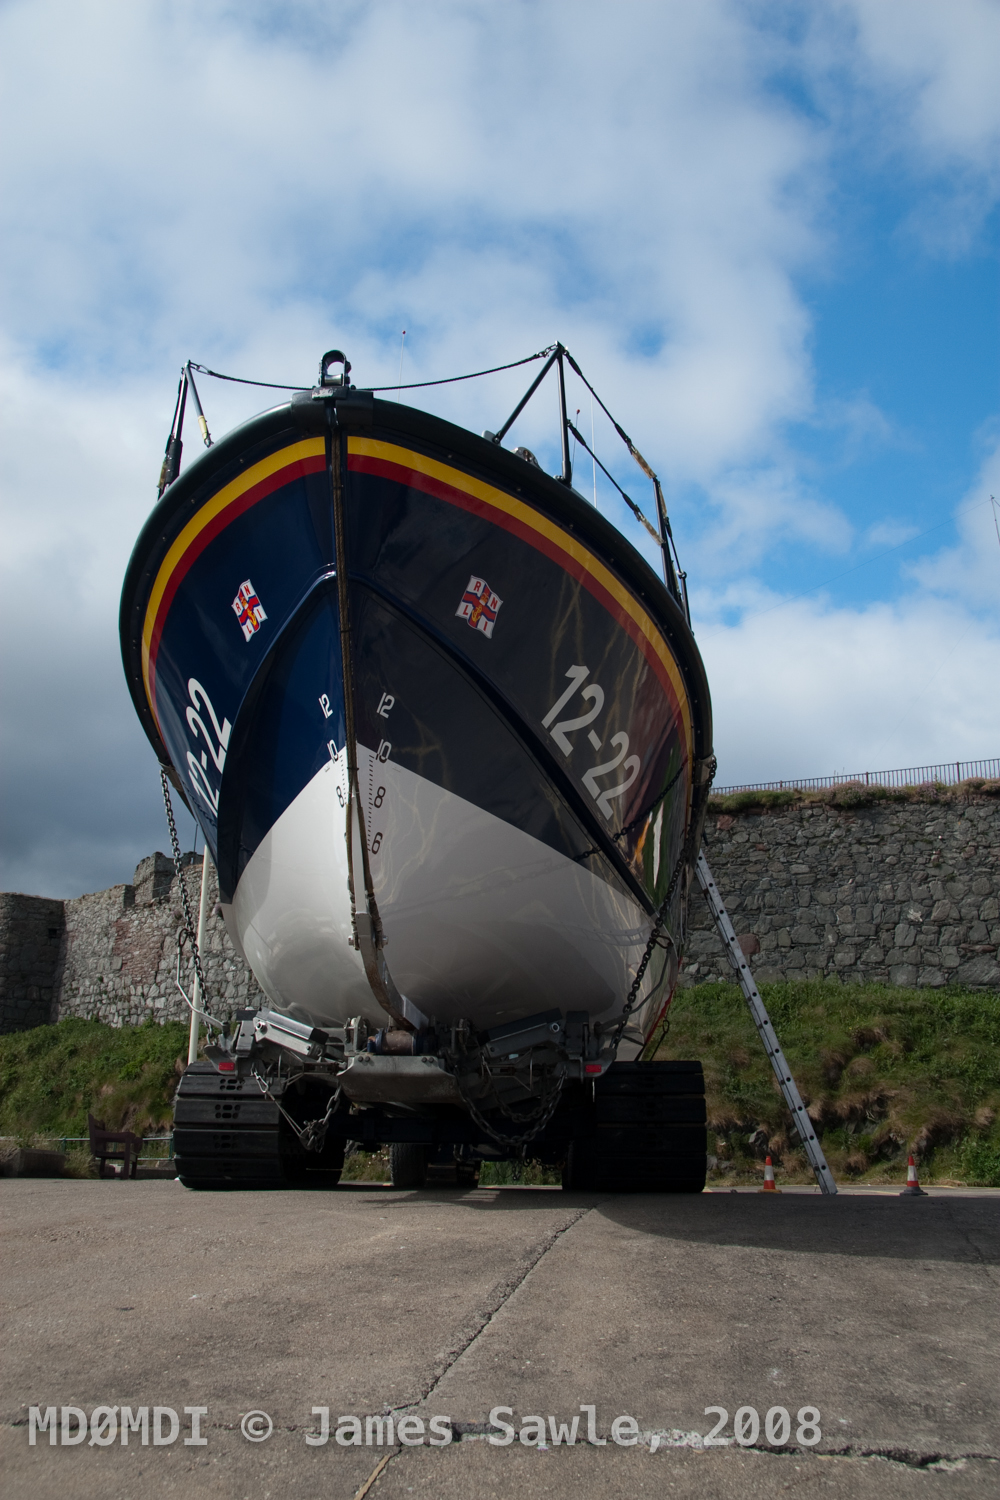 The lifeboat on the slipway for the open day at the Lifeboat Station.